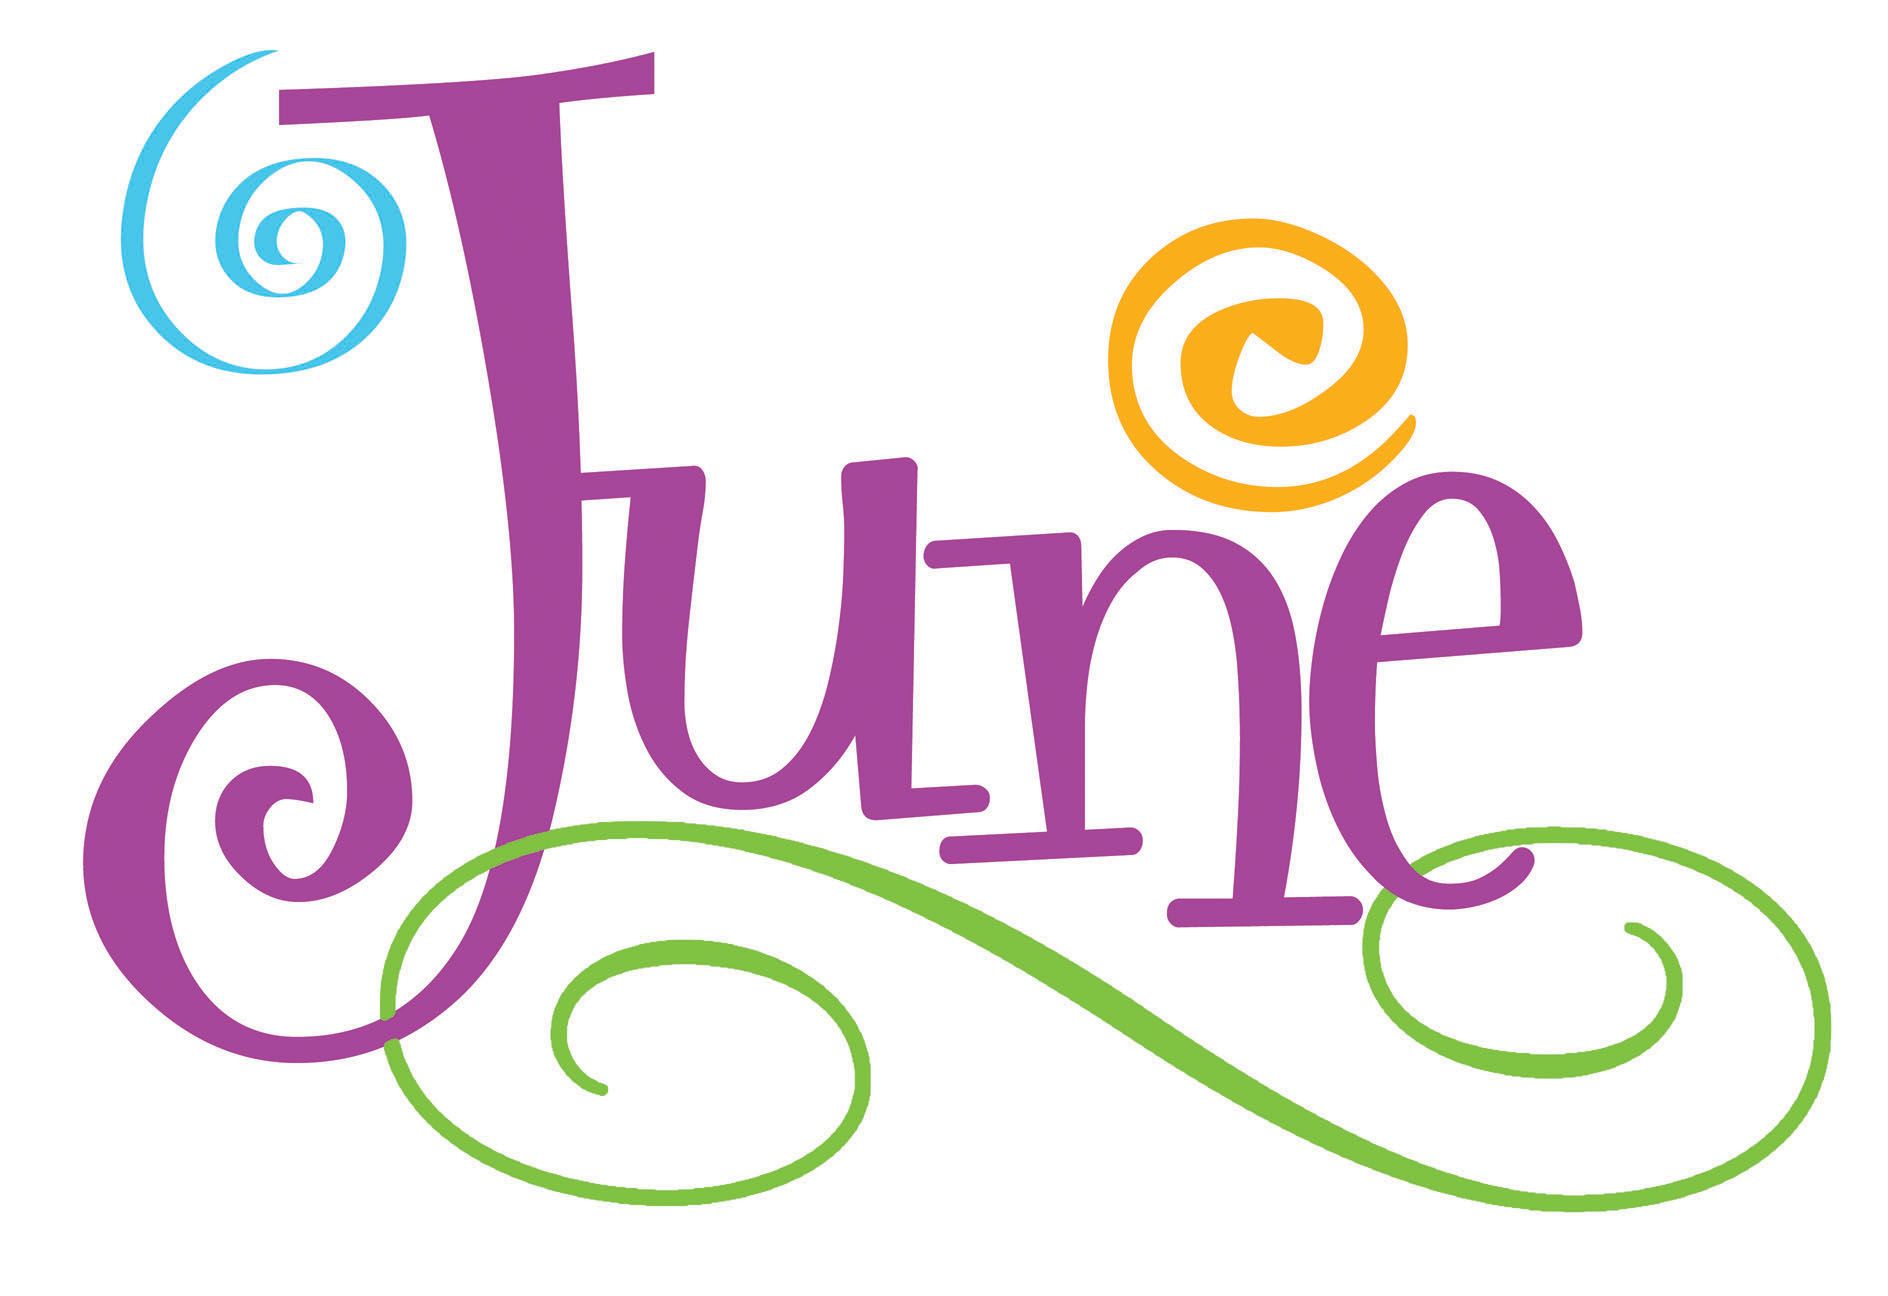 All You Need To Know About The Month of June - Read and Share